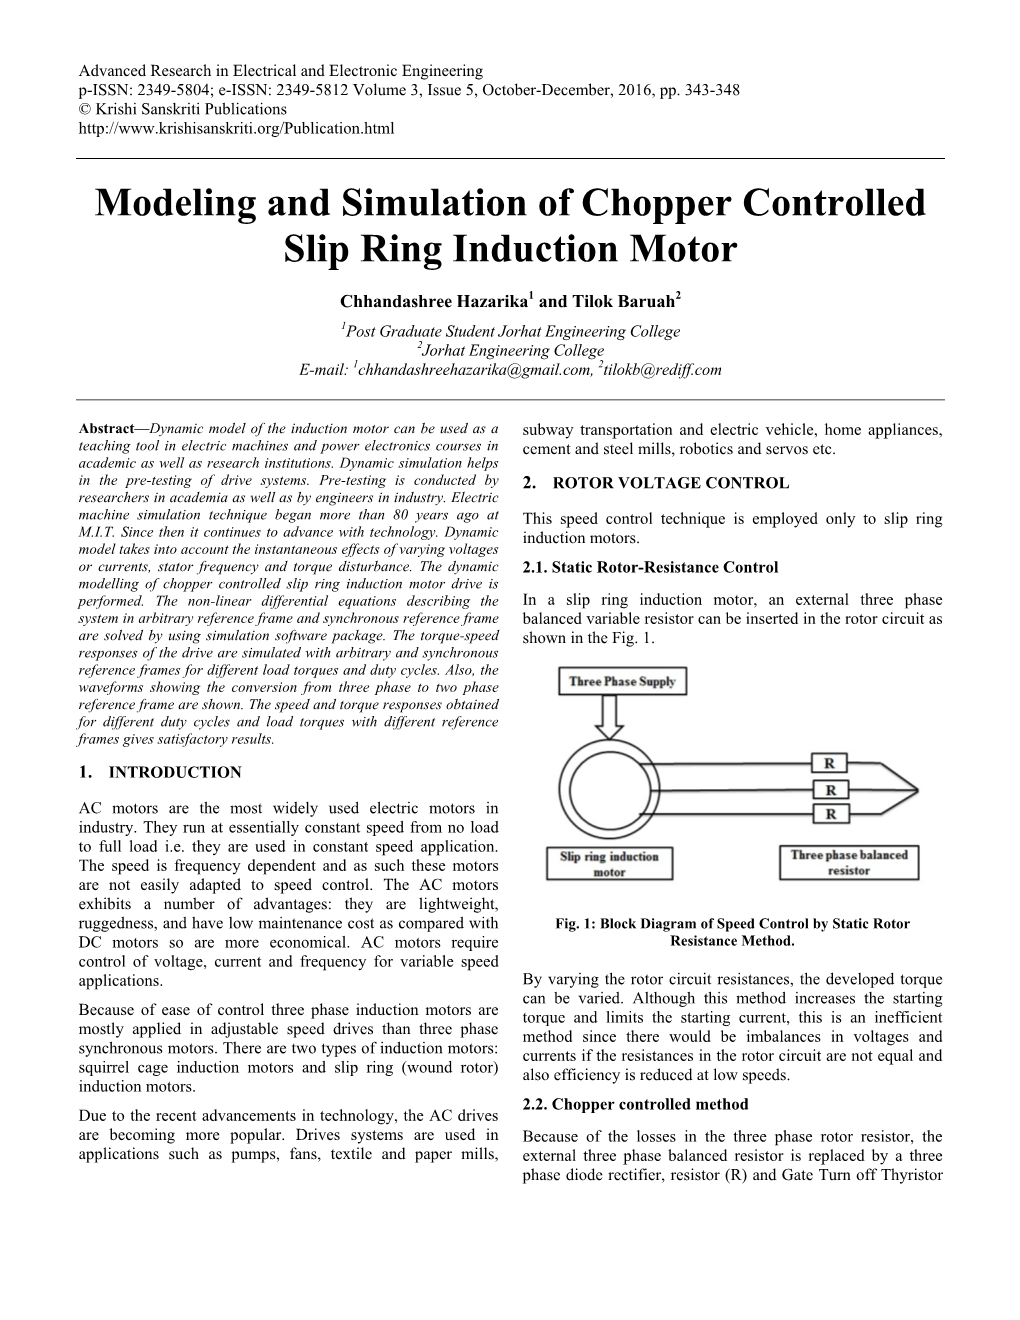 Modeling and Simulation of Chopper Controlled Slip Ring Induction Motor